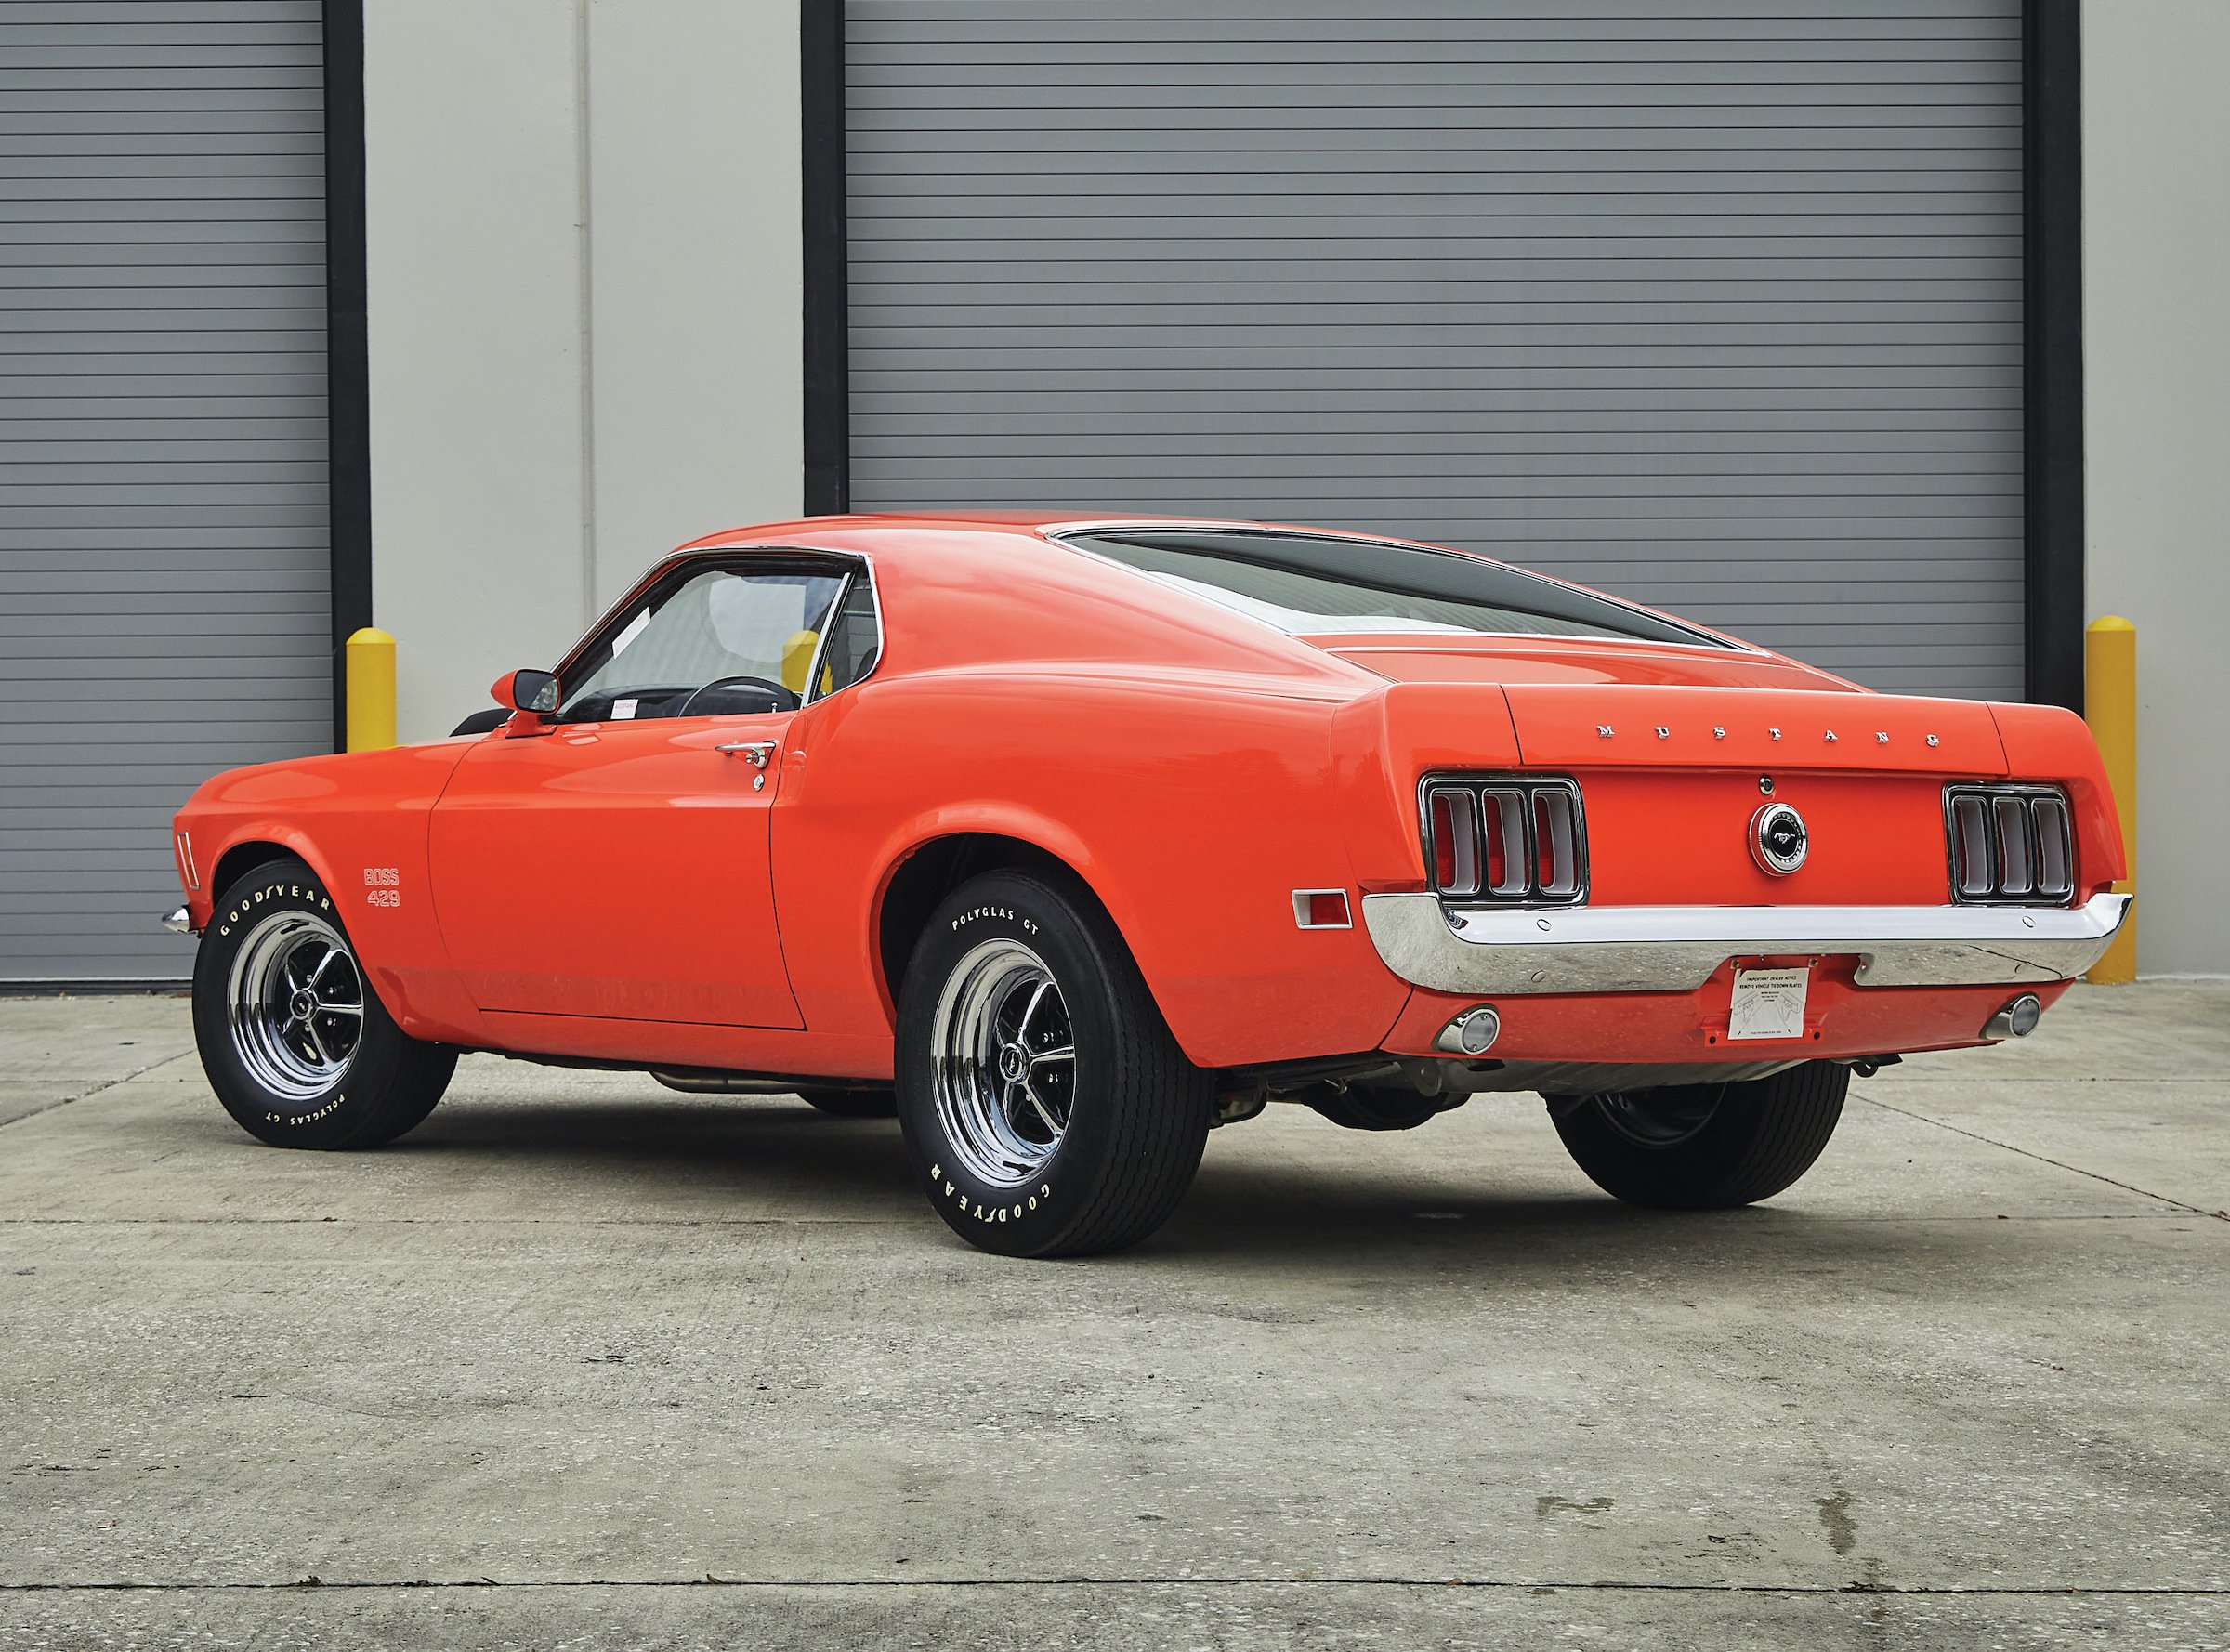 The Ford Mustang Boss 429 - A Street-Legal Car With A NASCAR Engine